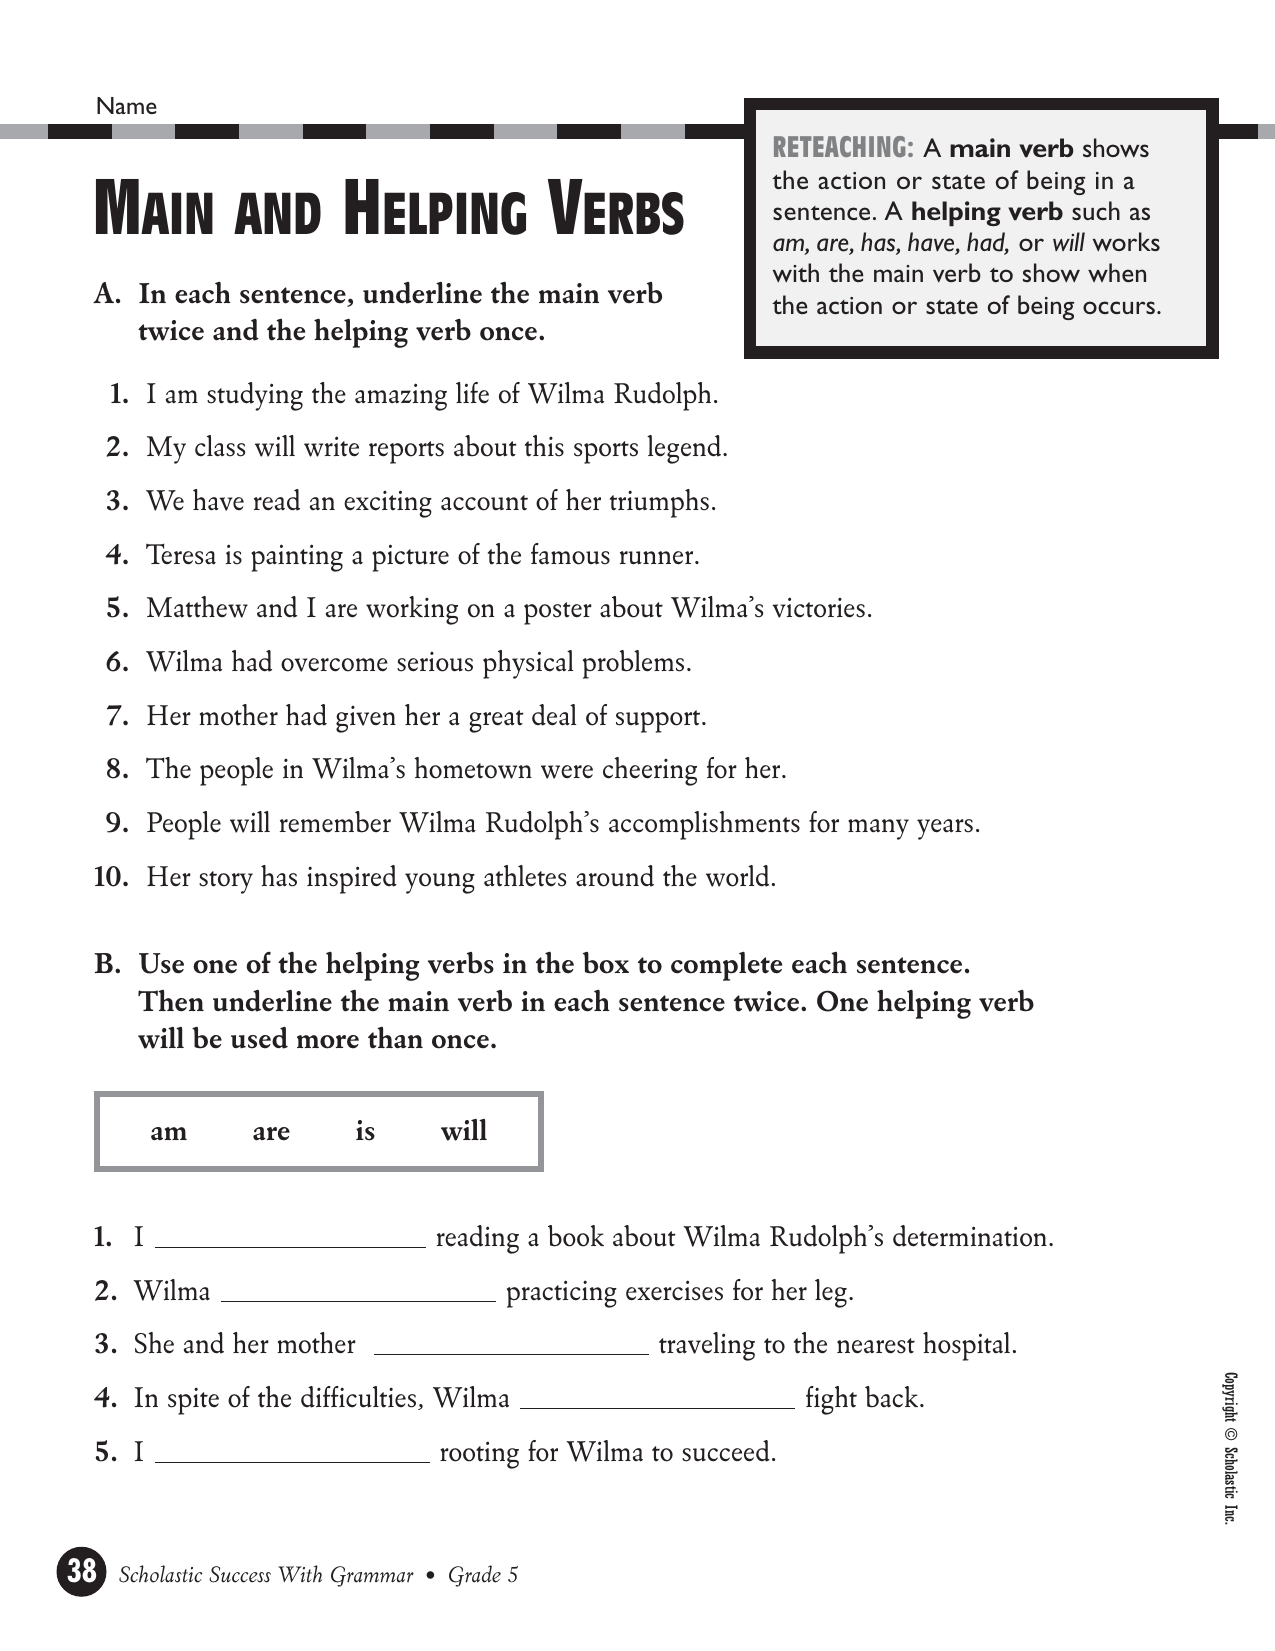 Helping Verbs Worksheets K5 Learning Main And Helping Verbs Exercise 